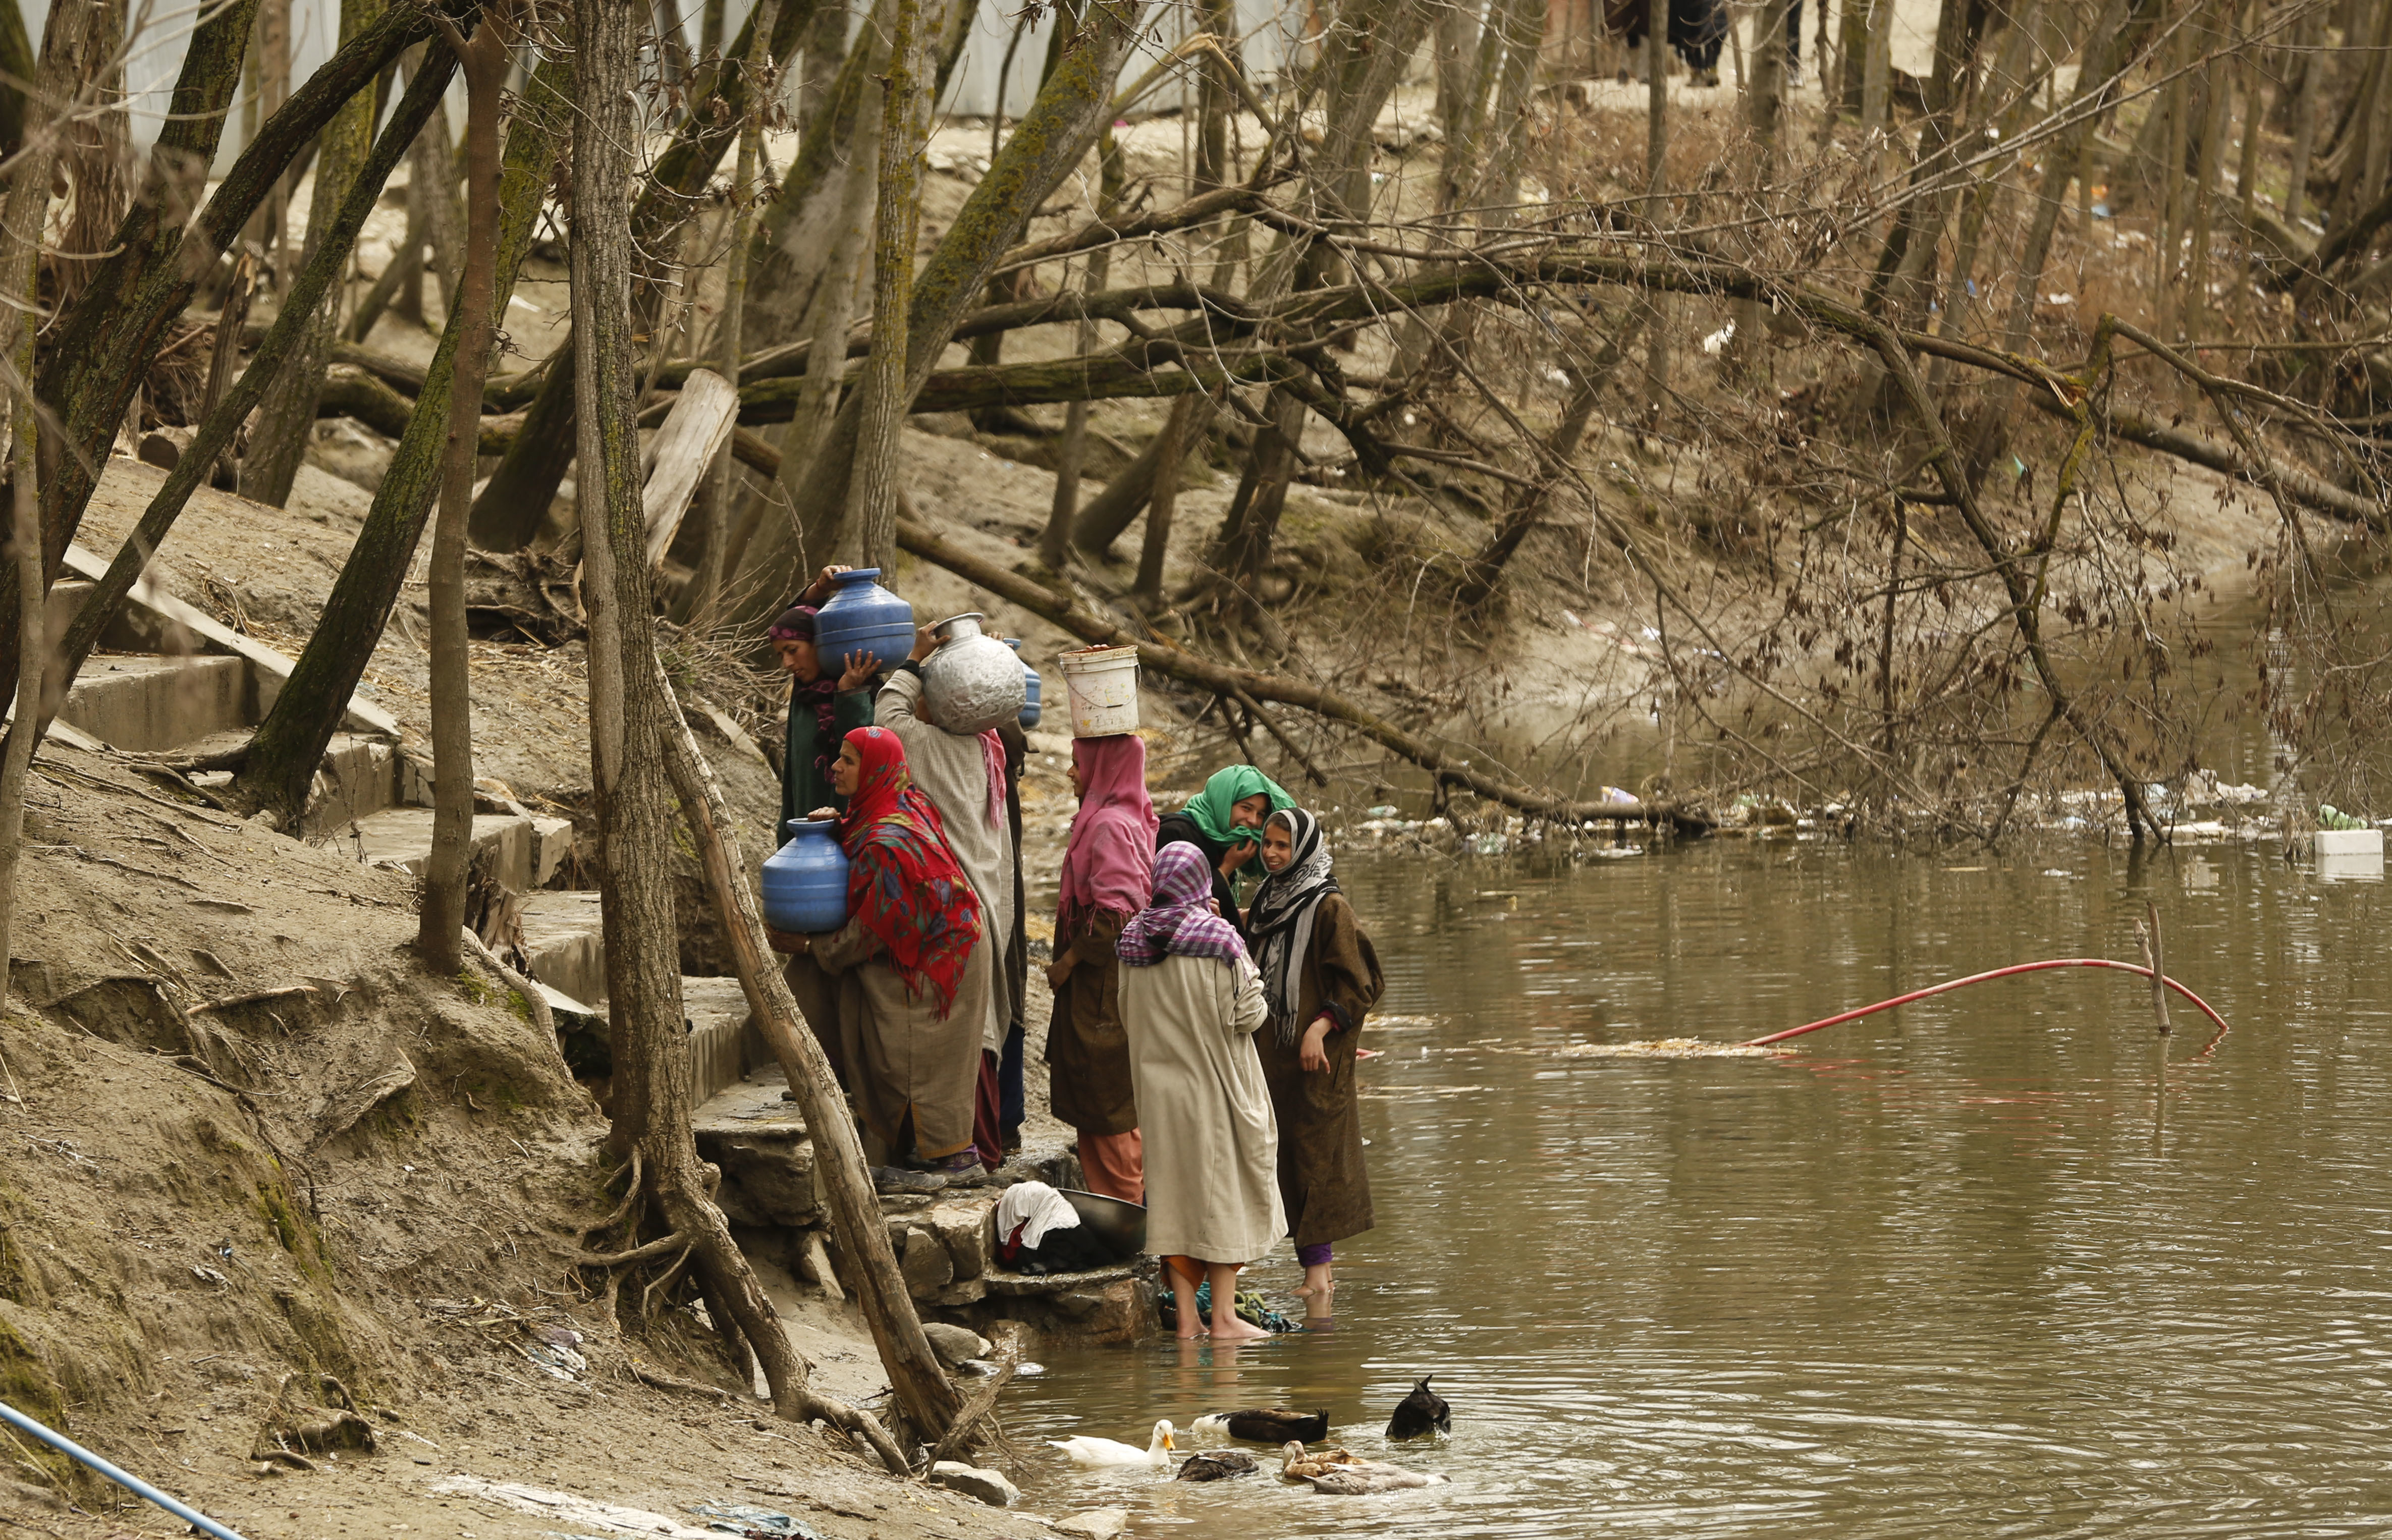 Kashmiri village women prepare to walk towards their home after collecting water from a river, on World Water Day in Dasilpora, north of Srinagar, Indian controlled Kashmir, Wednesday, March 22, 2017.  India has the world's highest number of people without access to clean water. According to UNICEF, the U.N.'s children's agency, nearly 78 million Indians — or about 5 percent of the country's 1.3 billion population — must make do with contaminated water sources or buy water at high rates. (AP Photo/Mukhtar Khan)